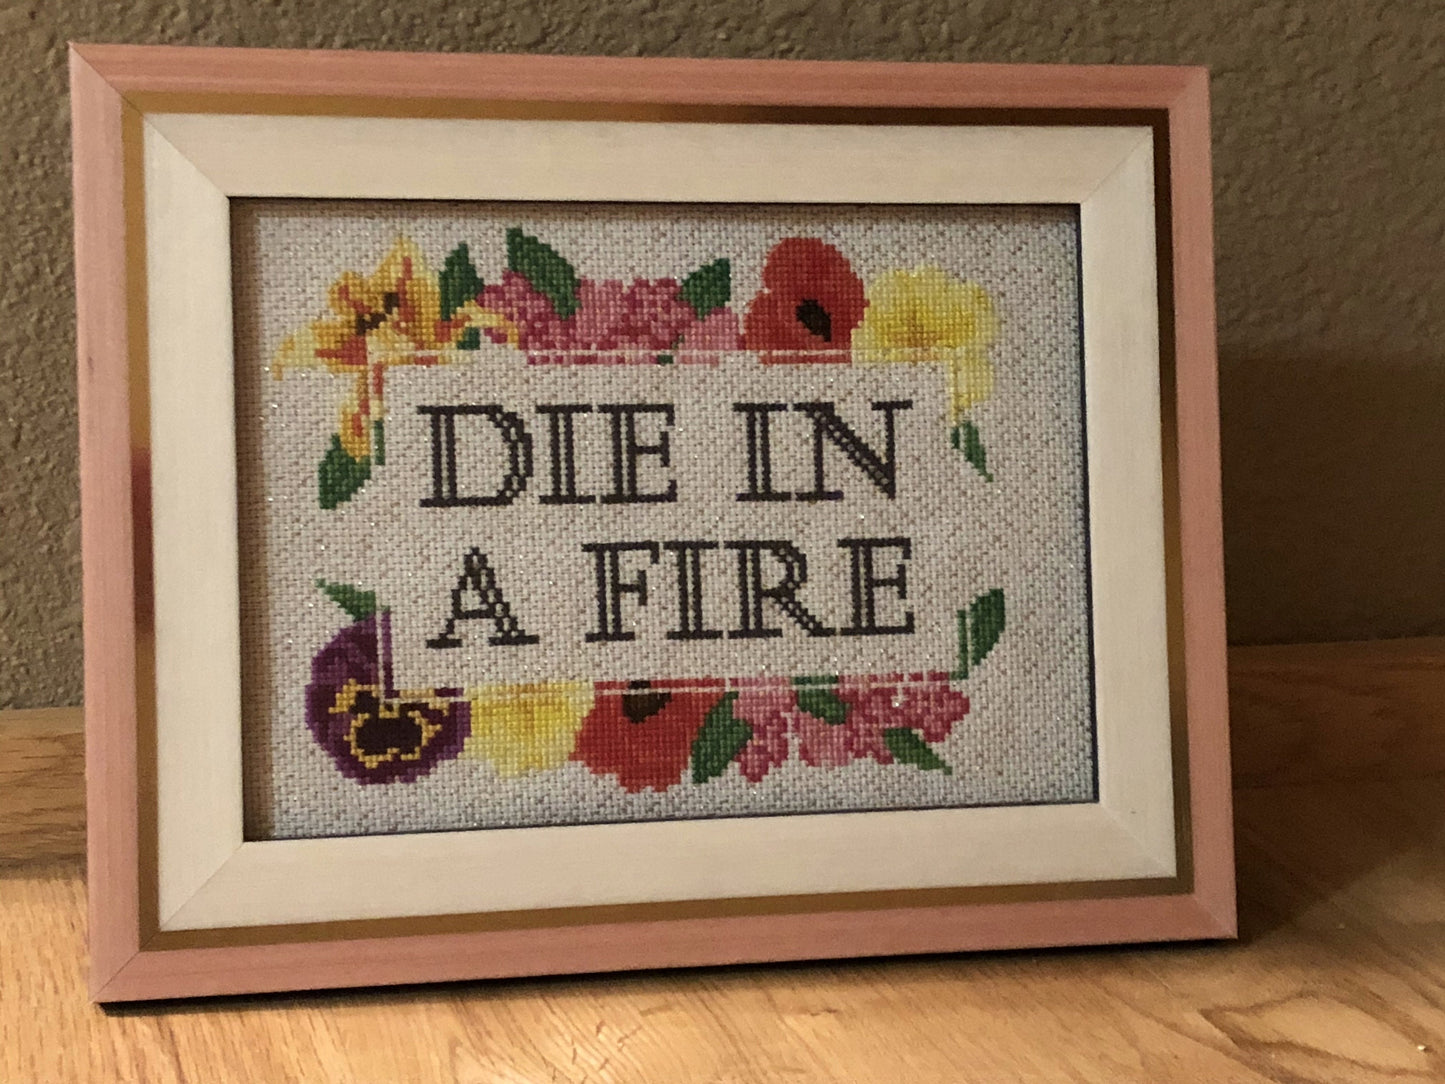 Die in a Fire - subversive floral cross stitch pattern - Instant PDF Download